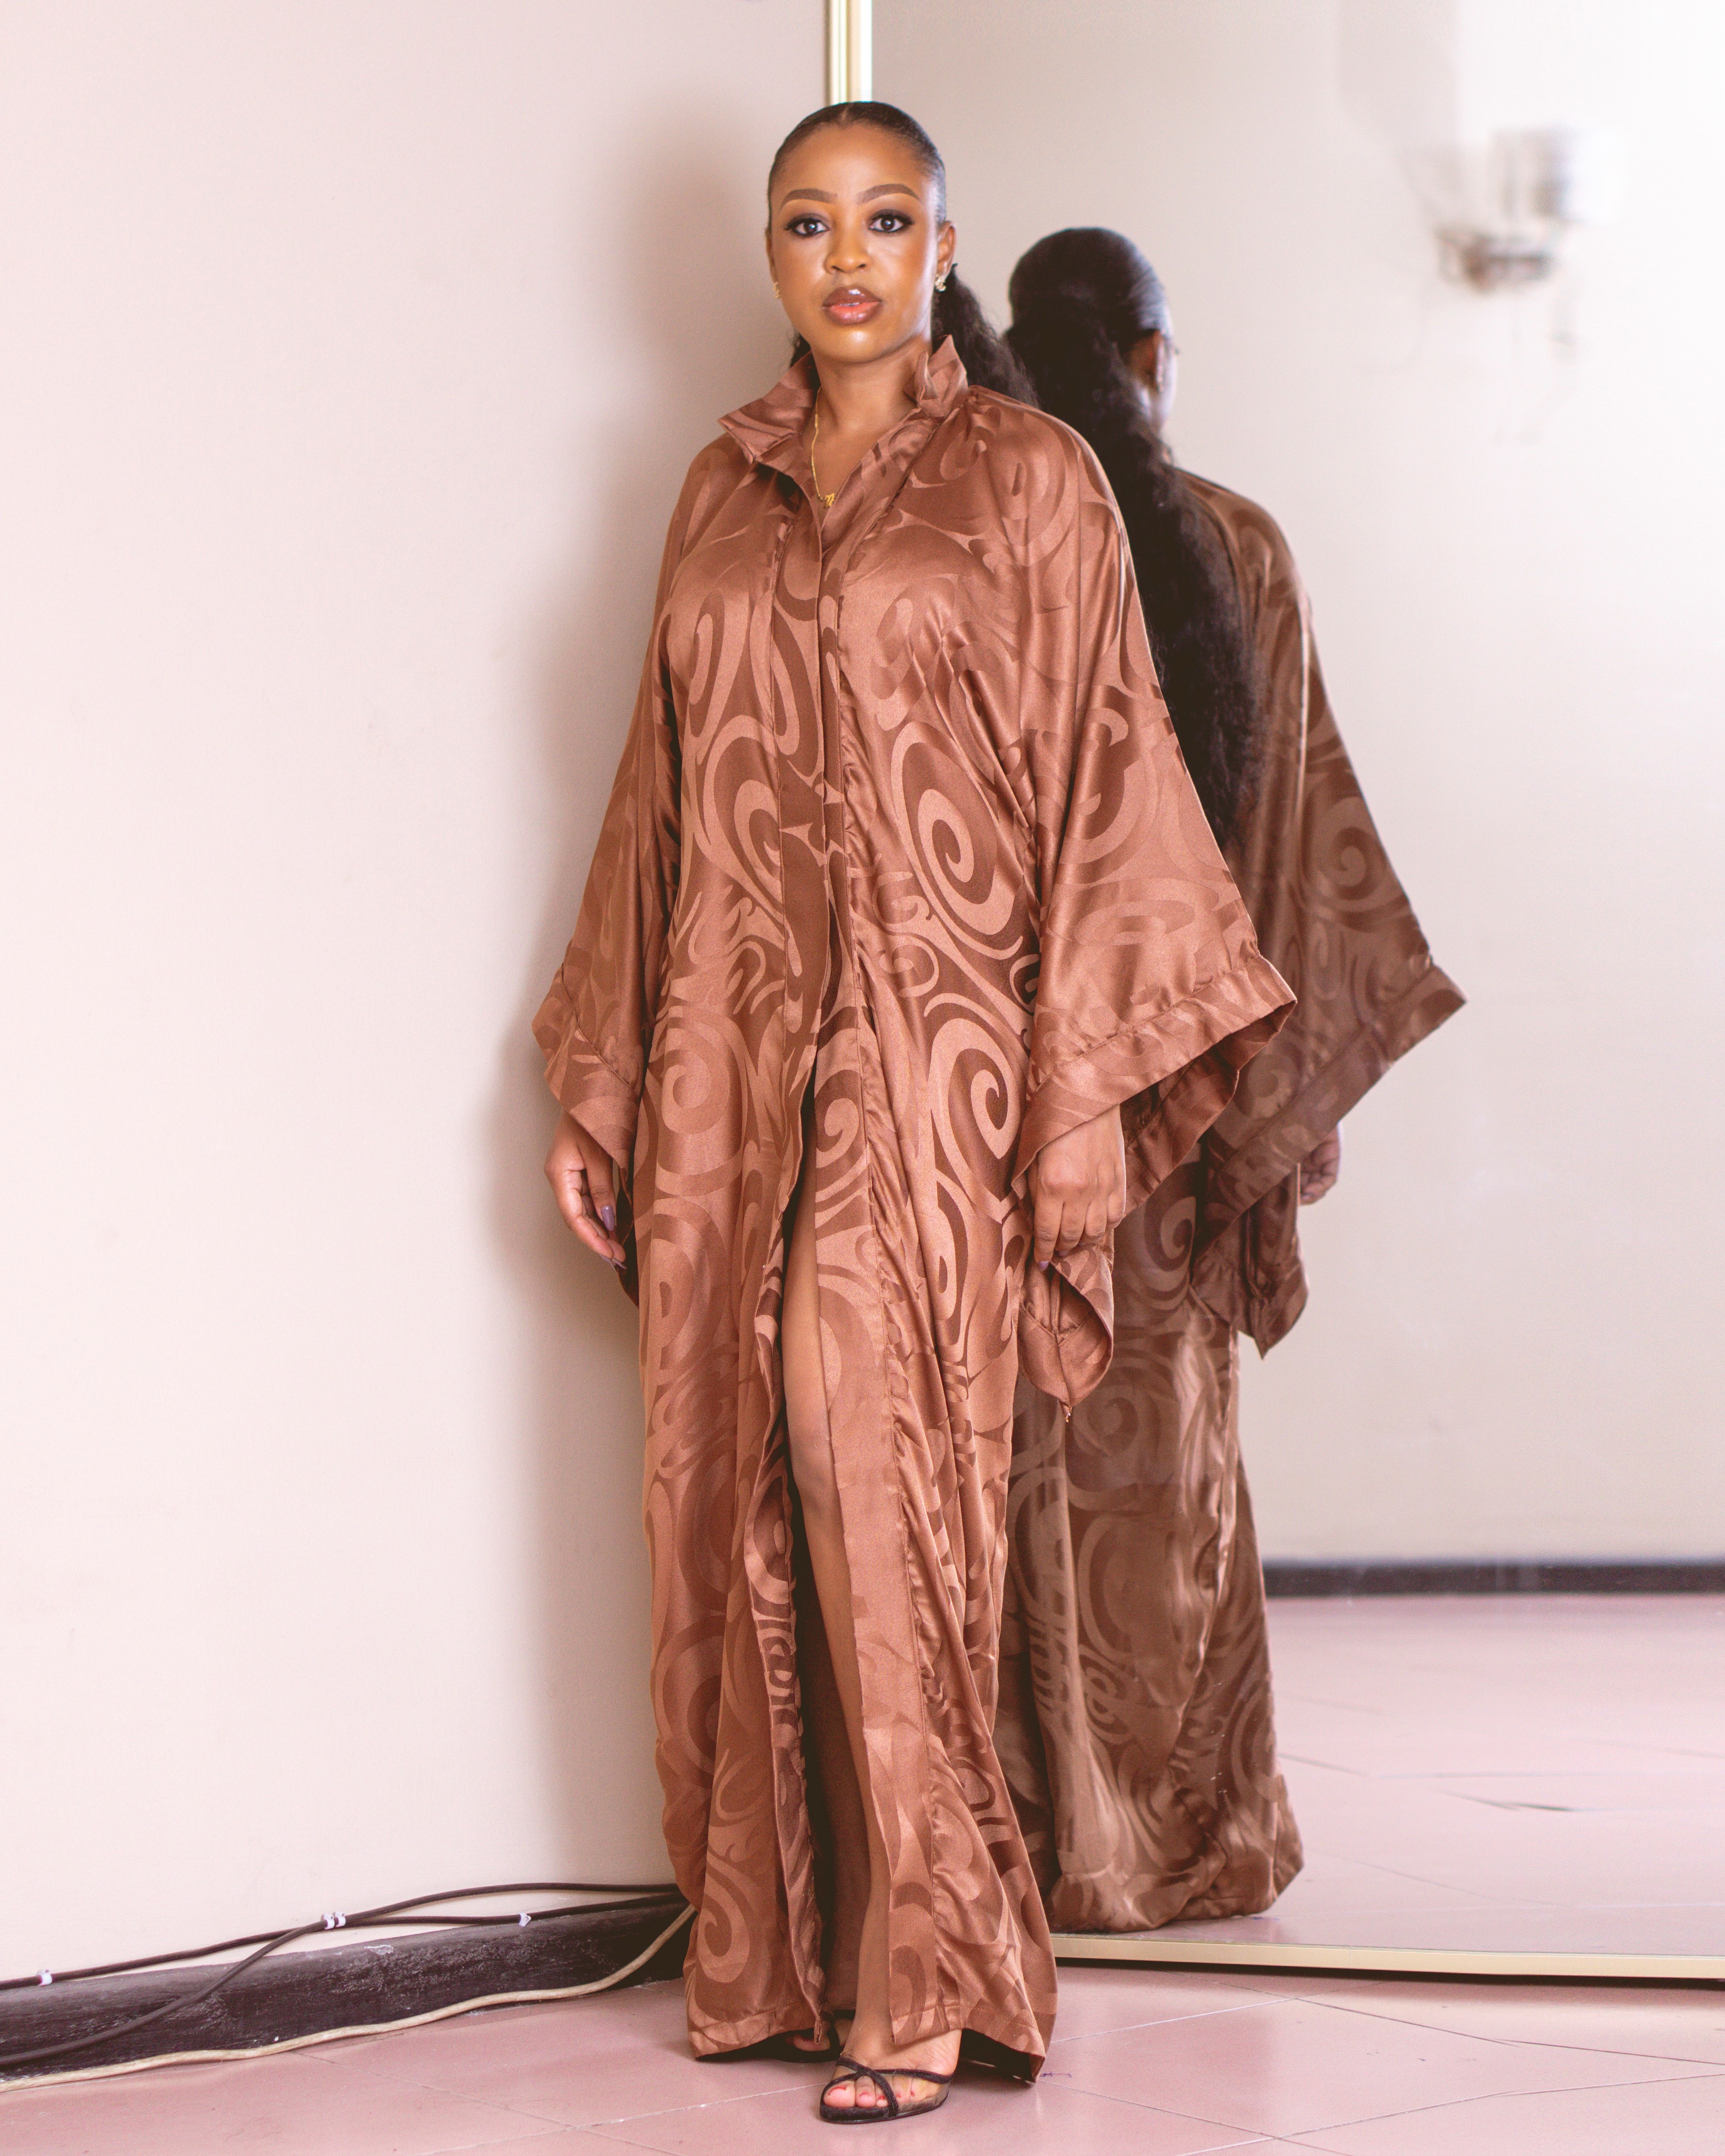 duster kimono by Titi Belo for It's Made To Order African Fashion shown in brown damask, silk blend fabric also available in black color